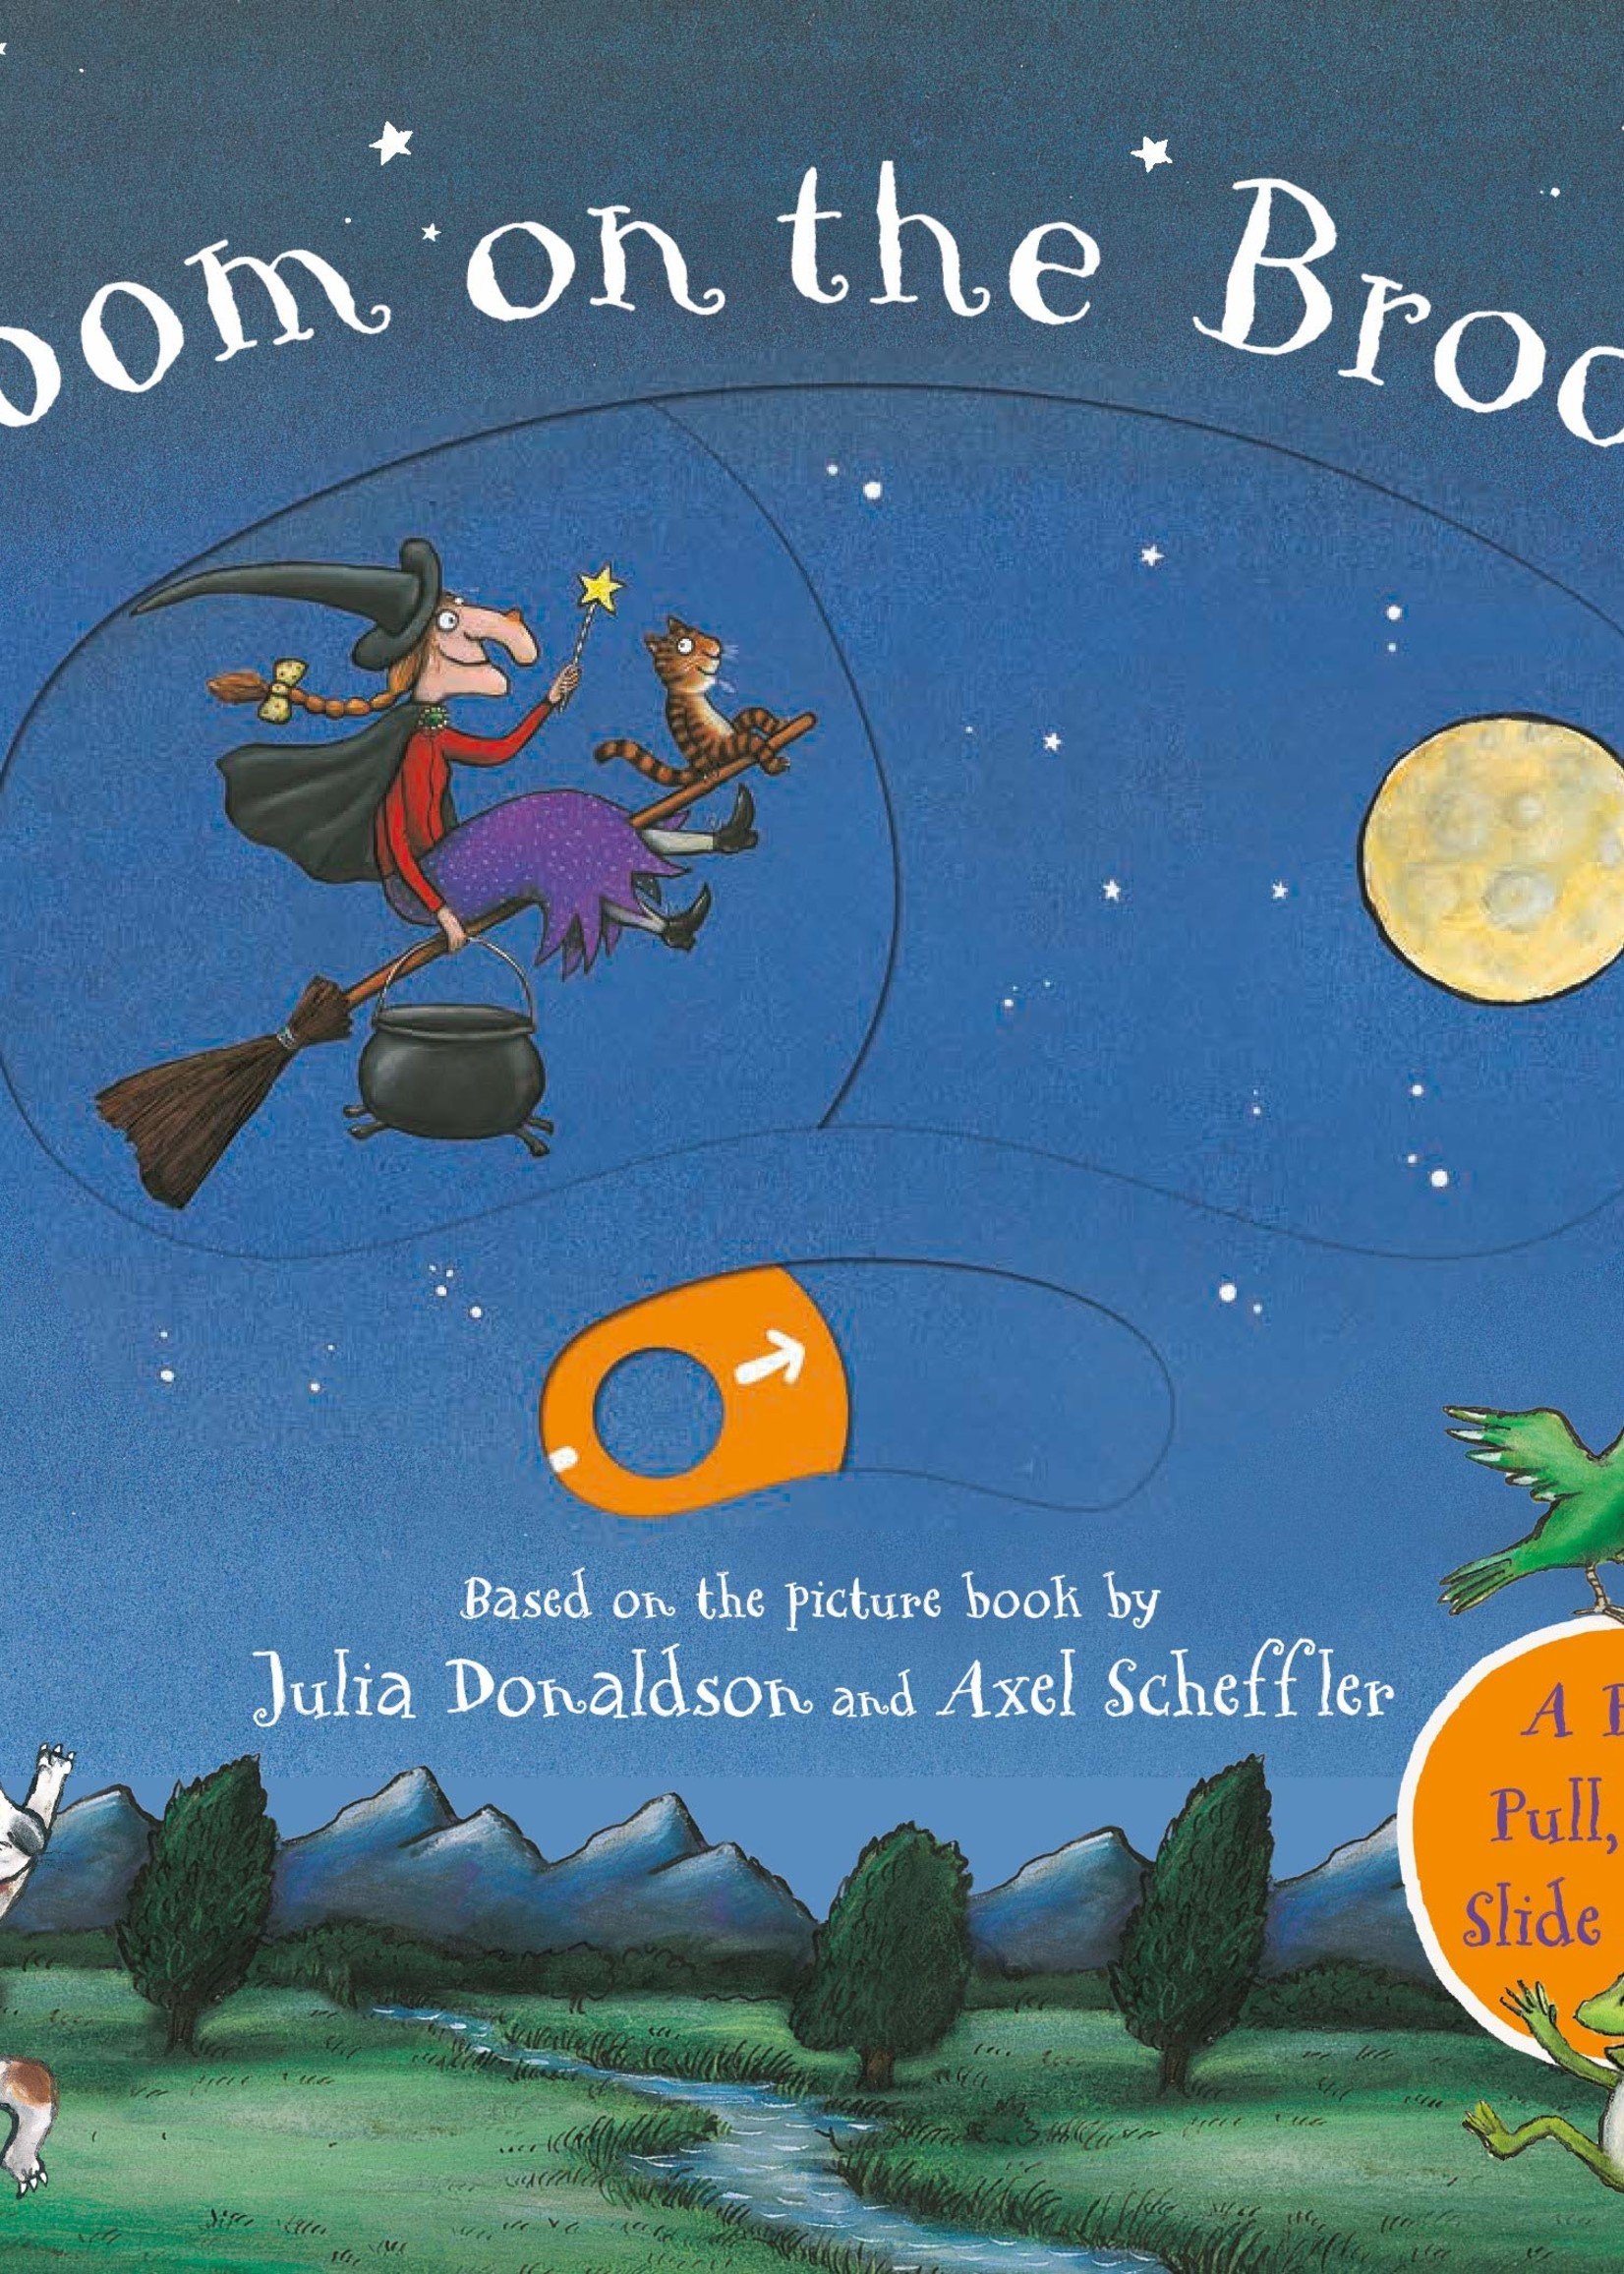 Room on the Broom, A Push, Pull and Slide Book - Board Book